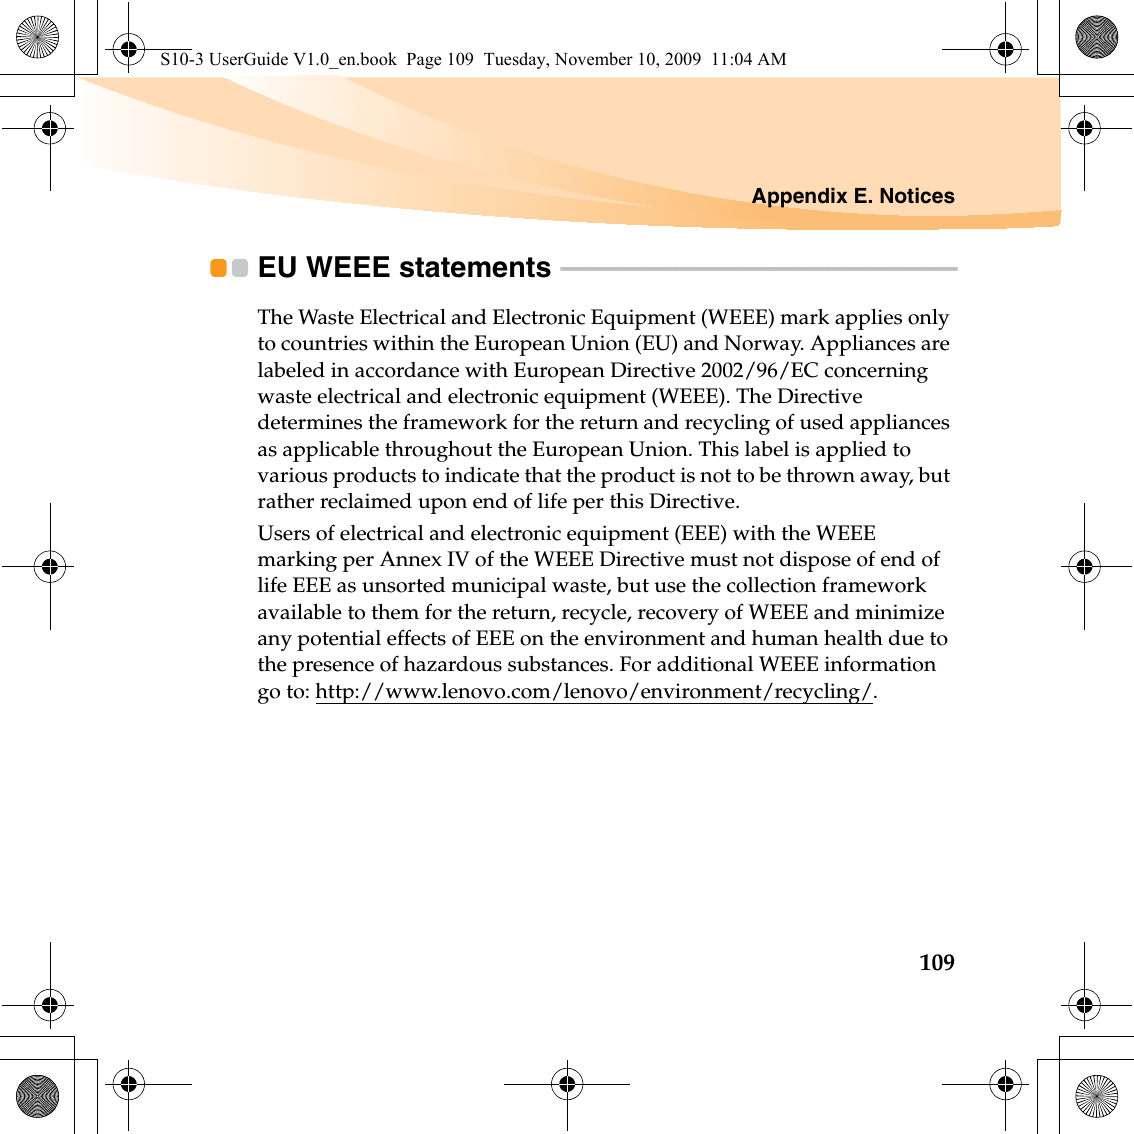 Appendix E. Notices109EU WEEE statements  - - - - - - - - - - - - - - - - - - - - - - - - - - - - - - - - - - - - - - - - - - - - - - - - - - - - - - - - - - - - - - - - -The Waste Electrical and Electronic Equipment (WEEE) mark applies only to countries within the European Union (EU) and Norway. Appliances are labeled in accordance with European Directive 2002/96/EC concerning waste electrical and electronic equipment (WEEE). The Directive determines the framework for the return and recycling of used appliances as applicable throughout the European Union. This label is applied to various products to indicate that the product is not to be thrown away, but rather reclaimed upon end of life per this Directive.Users of electrical and electronic equipment (EEE) with the WEEE marking per Annex IV of the WEEE Directive must not dispose of end of life EEE as unsorted municipal waste, but use the collection framework available to them for the return, recycle, recovery of WEEE and minimize any potential effects of EEE on the environment and human health due to the presence of hazardous substances. For additional WEEE information go to: http://www.lenovo.com/lenovo/environment/recycling/.S10-3 UserGuide V1.0_en.book  Page 109  Tuesday, November 10, 2009  11:04 AM